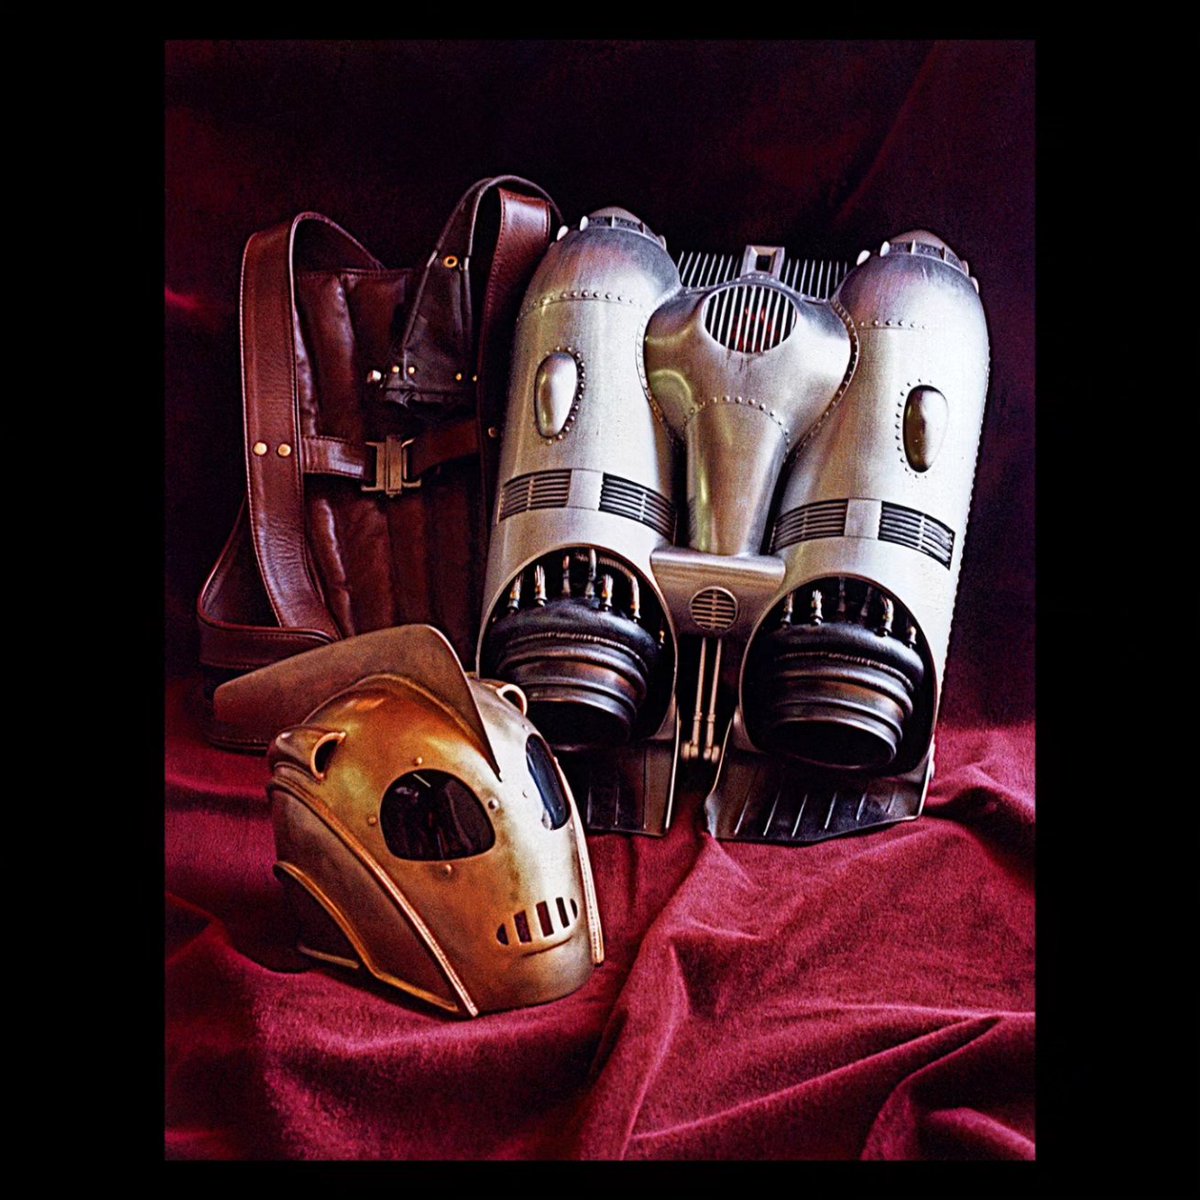 Happy to announce that my book about the making of The Rocketeer helmet and rocket pack has gone to the printers to have a test print made.   I will make it available to everyone by June.  I'll keep you posted here. Beauty shot by Henry Darnell. #rocketeer #davestevens #propmaker